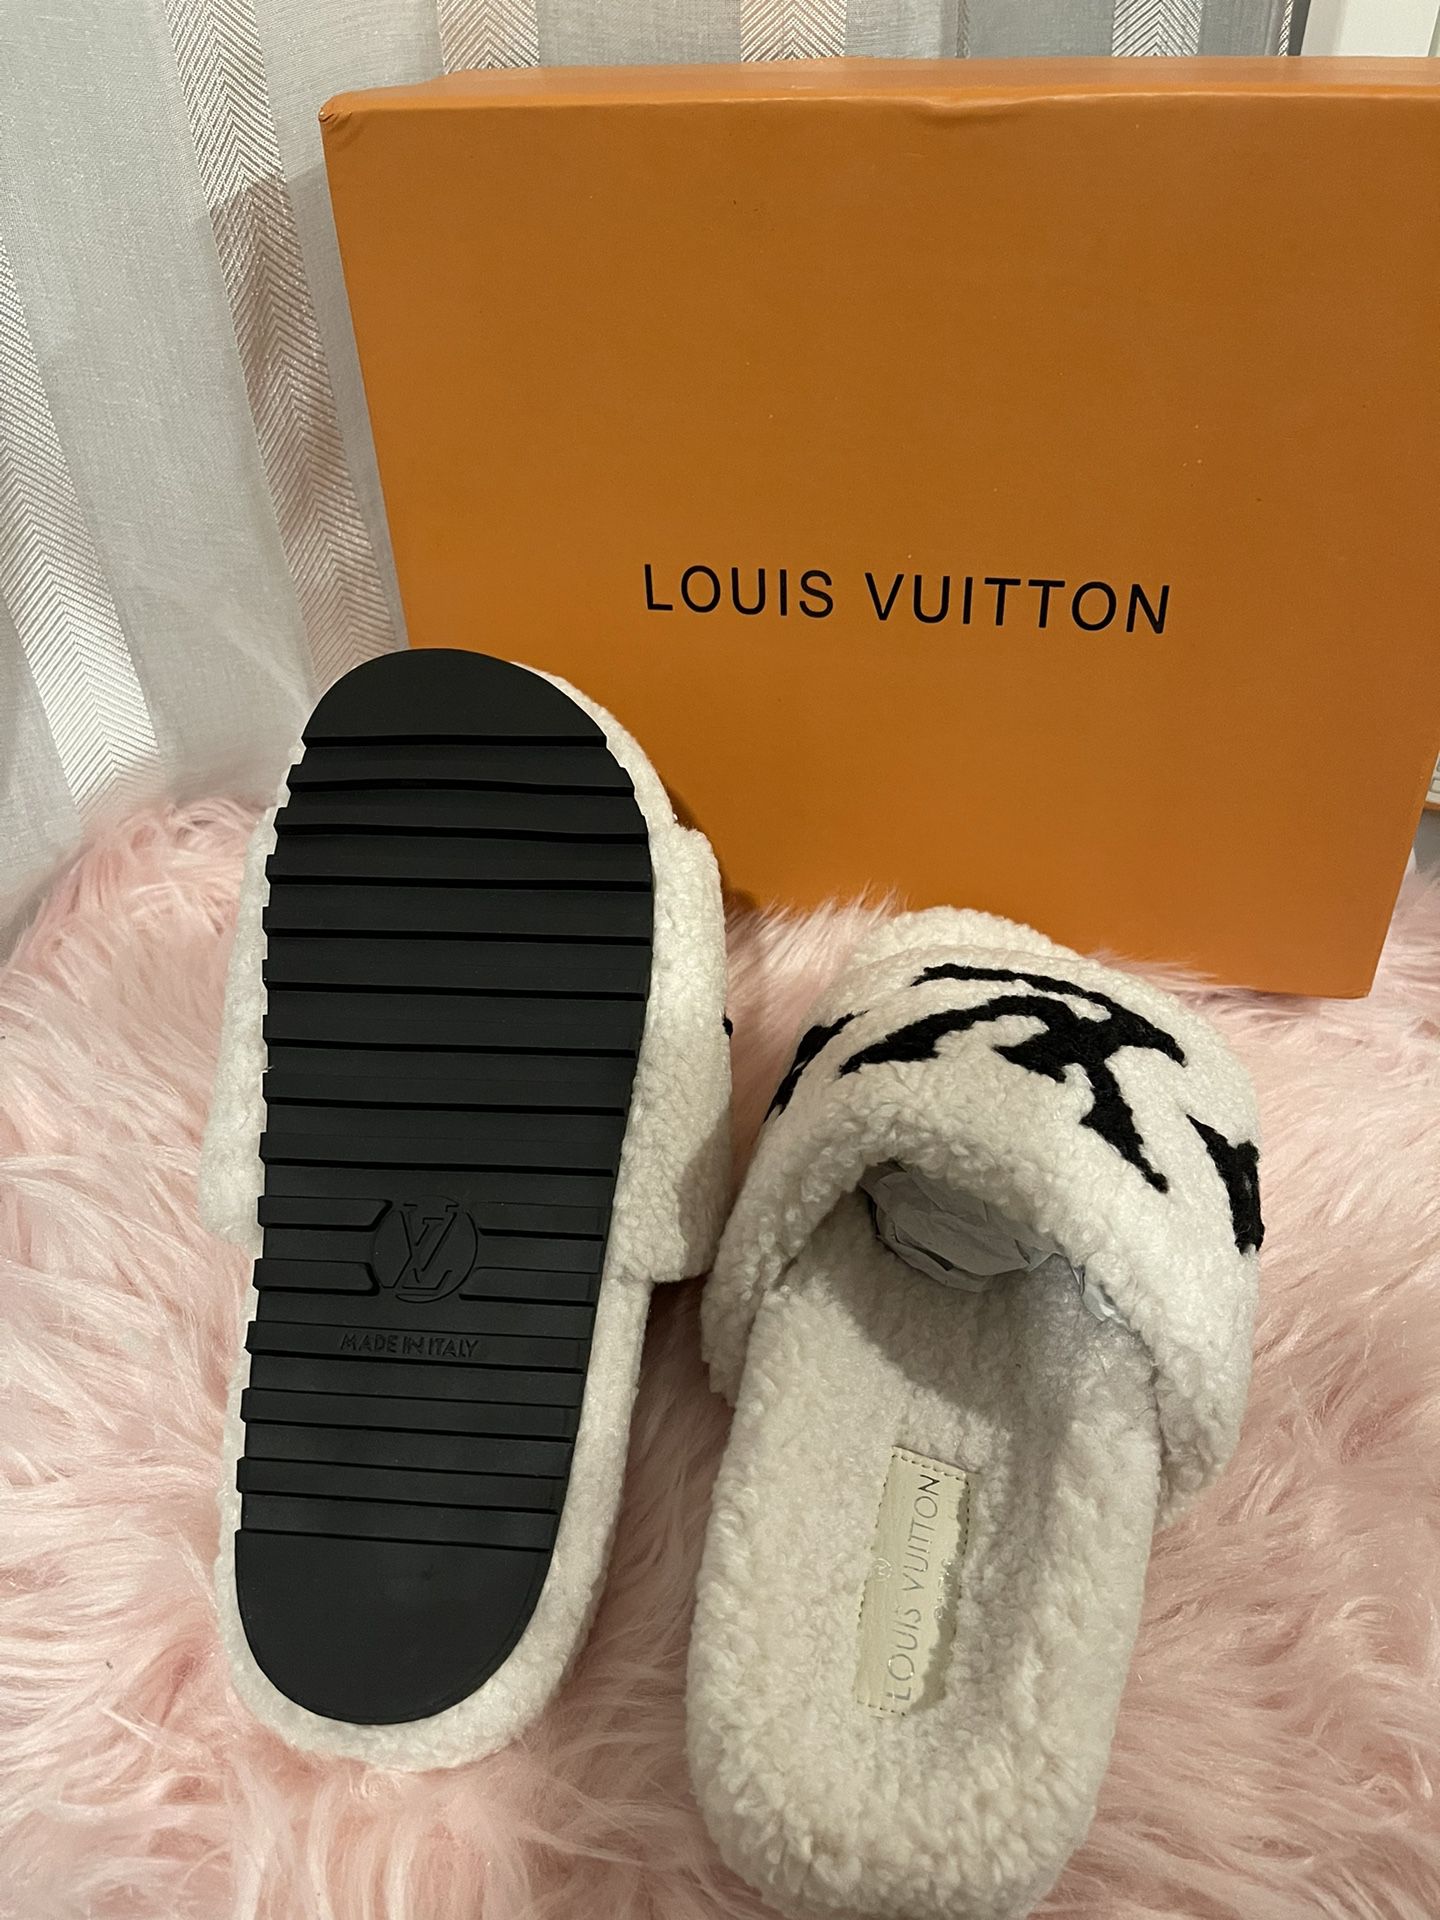 Lv Black Slippers for Sale in Corona, CA - OfferUp